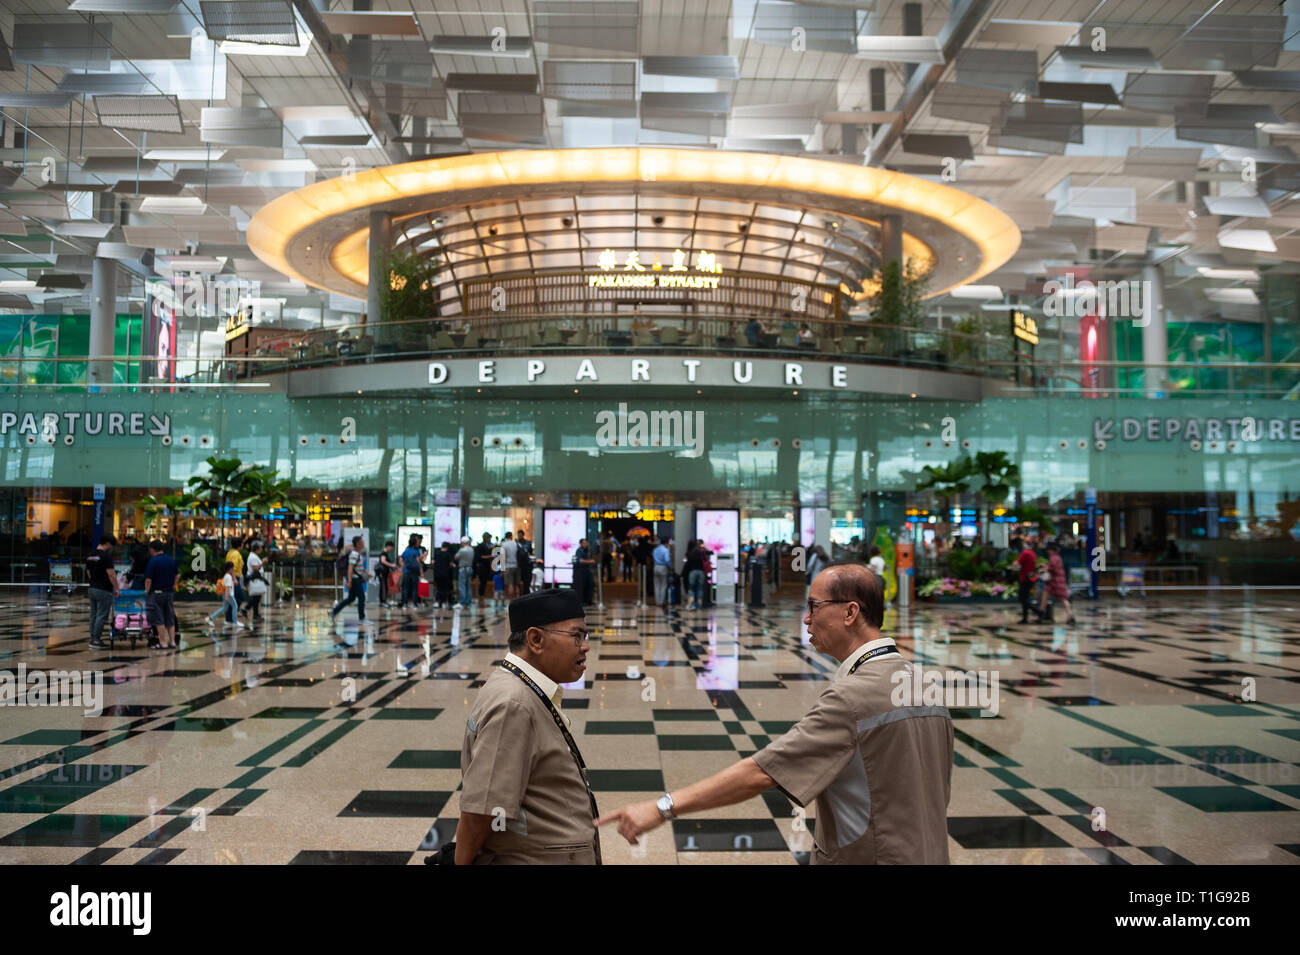 01.03.2019, Singapore, Singapore, Singapore - Two airport employees are talking in the departure hall of Terminal 3 at Changi Airport. 0SL190301D036CA Stock Photo